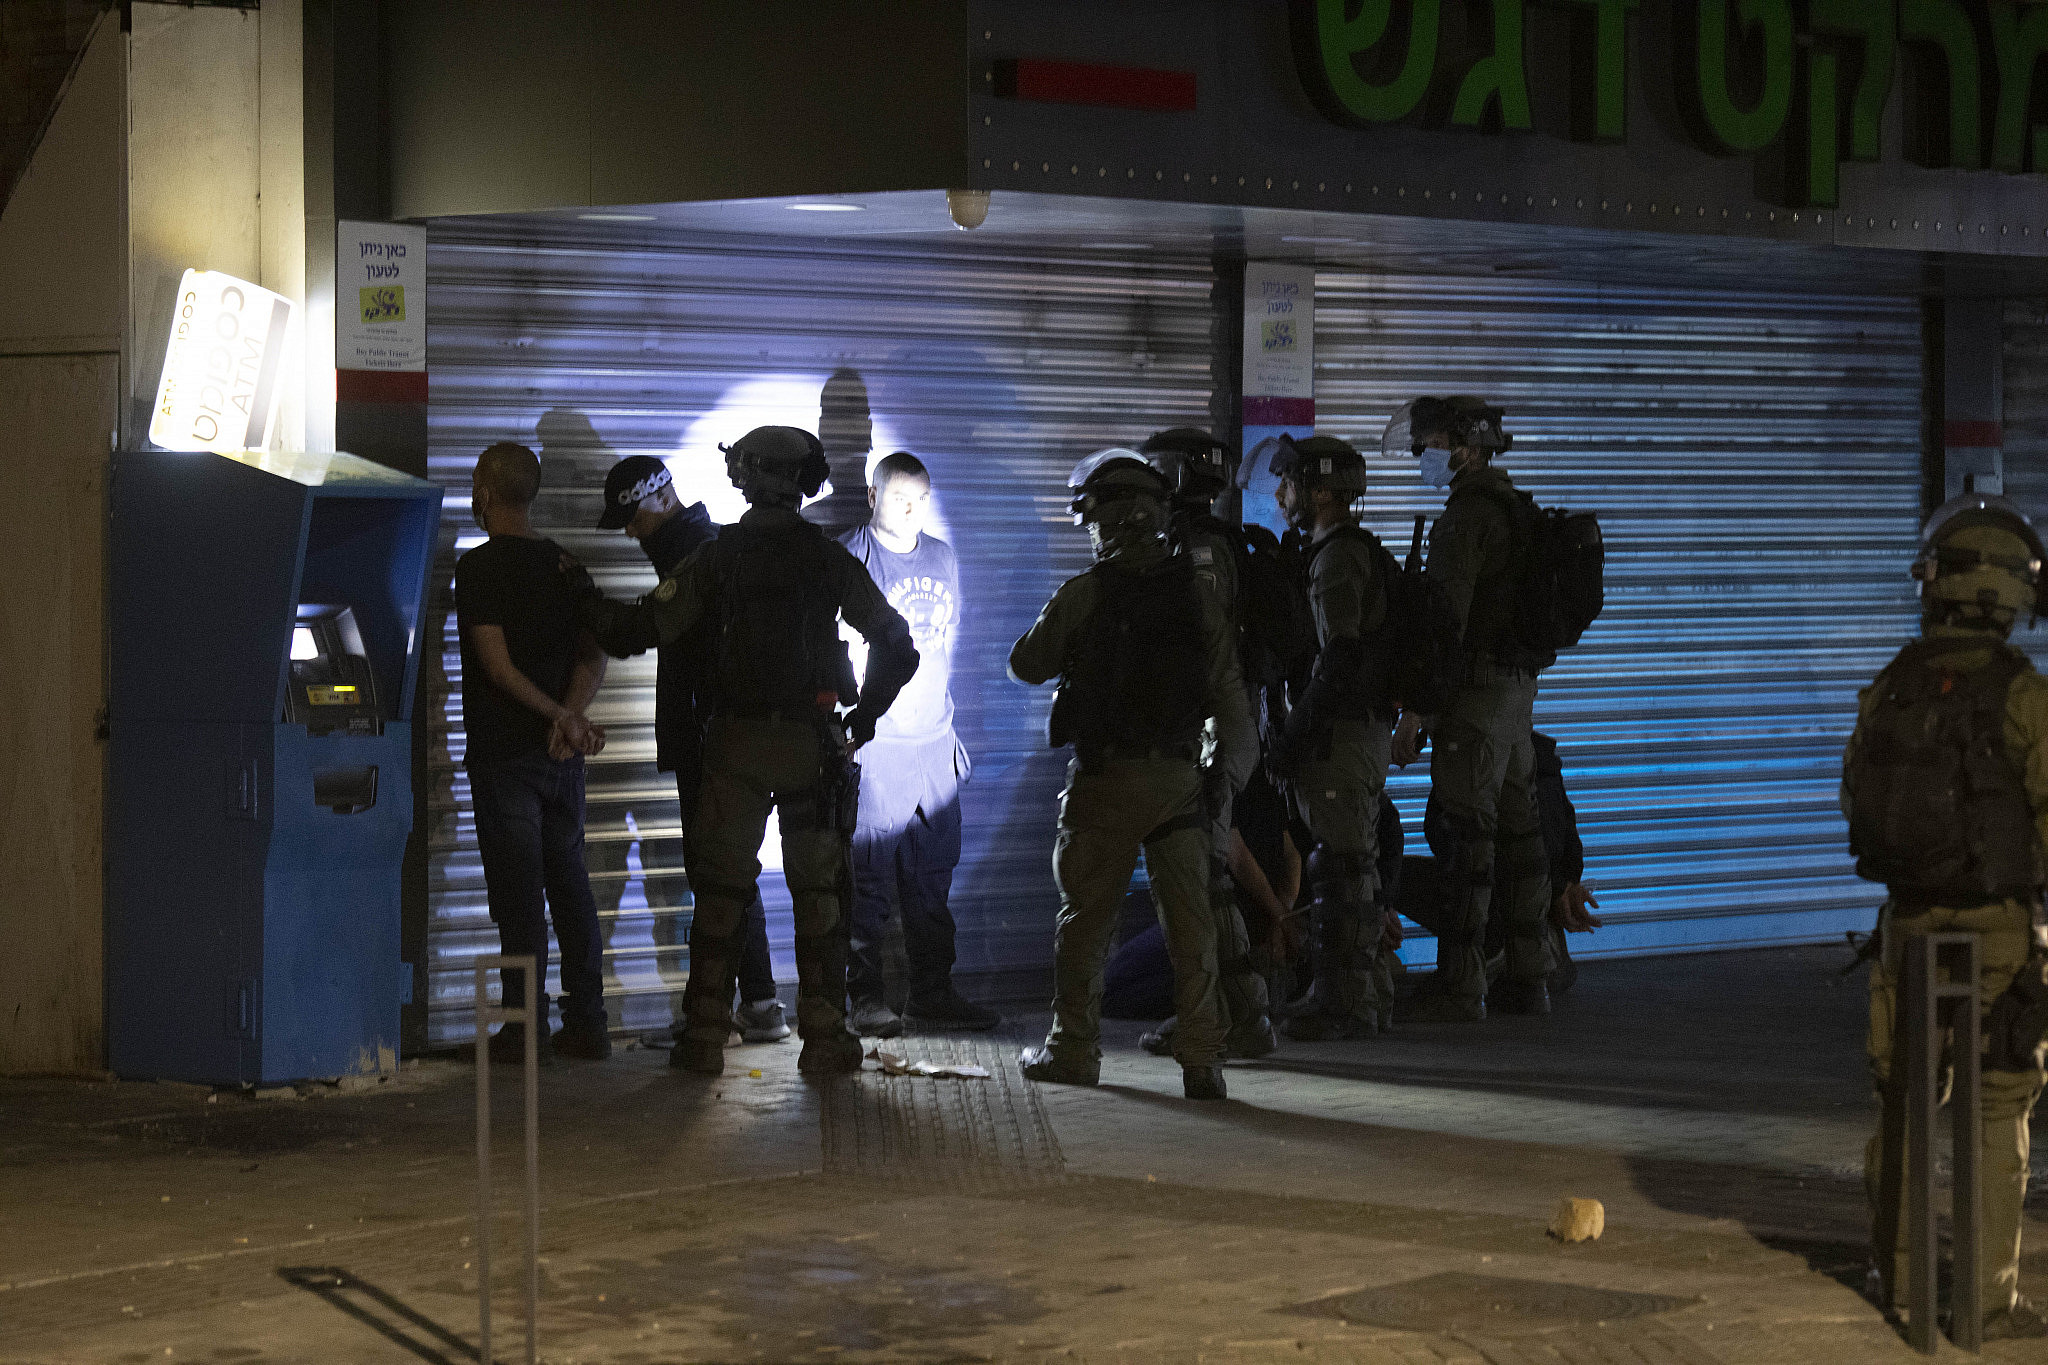 Israeli police arrest Palestinian citizens as armed settlers and police forces patrol the city of Lod/Lyd, May 13, 2021. (Oren Ziv/Activestills)